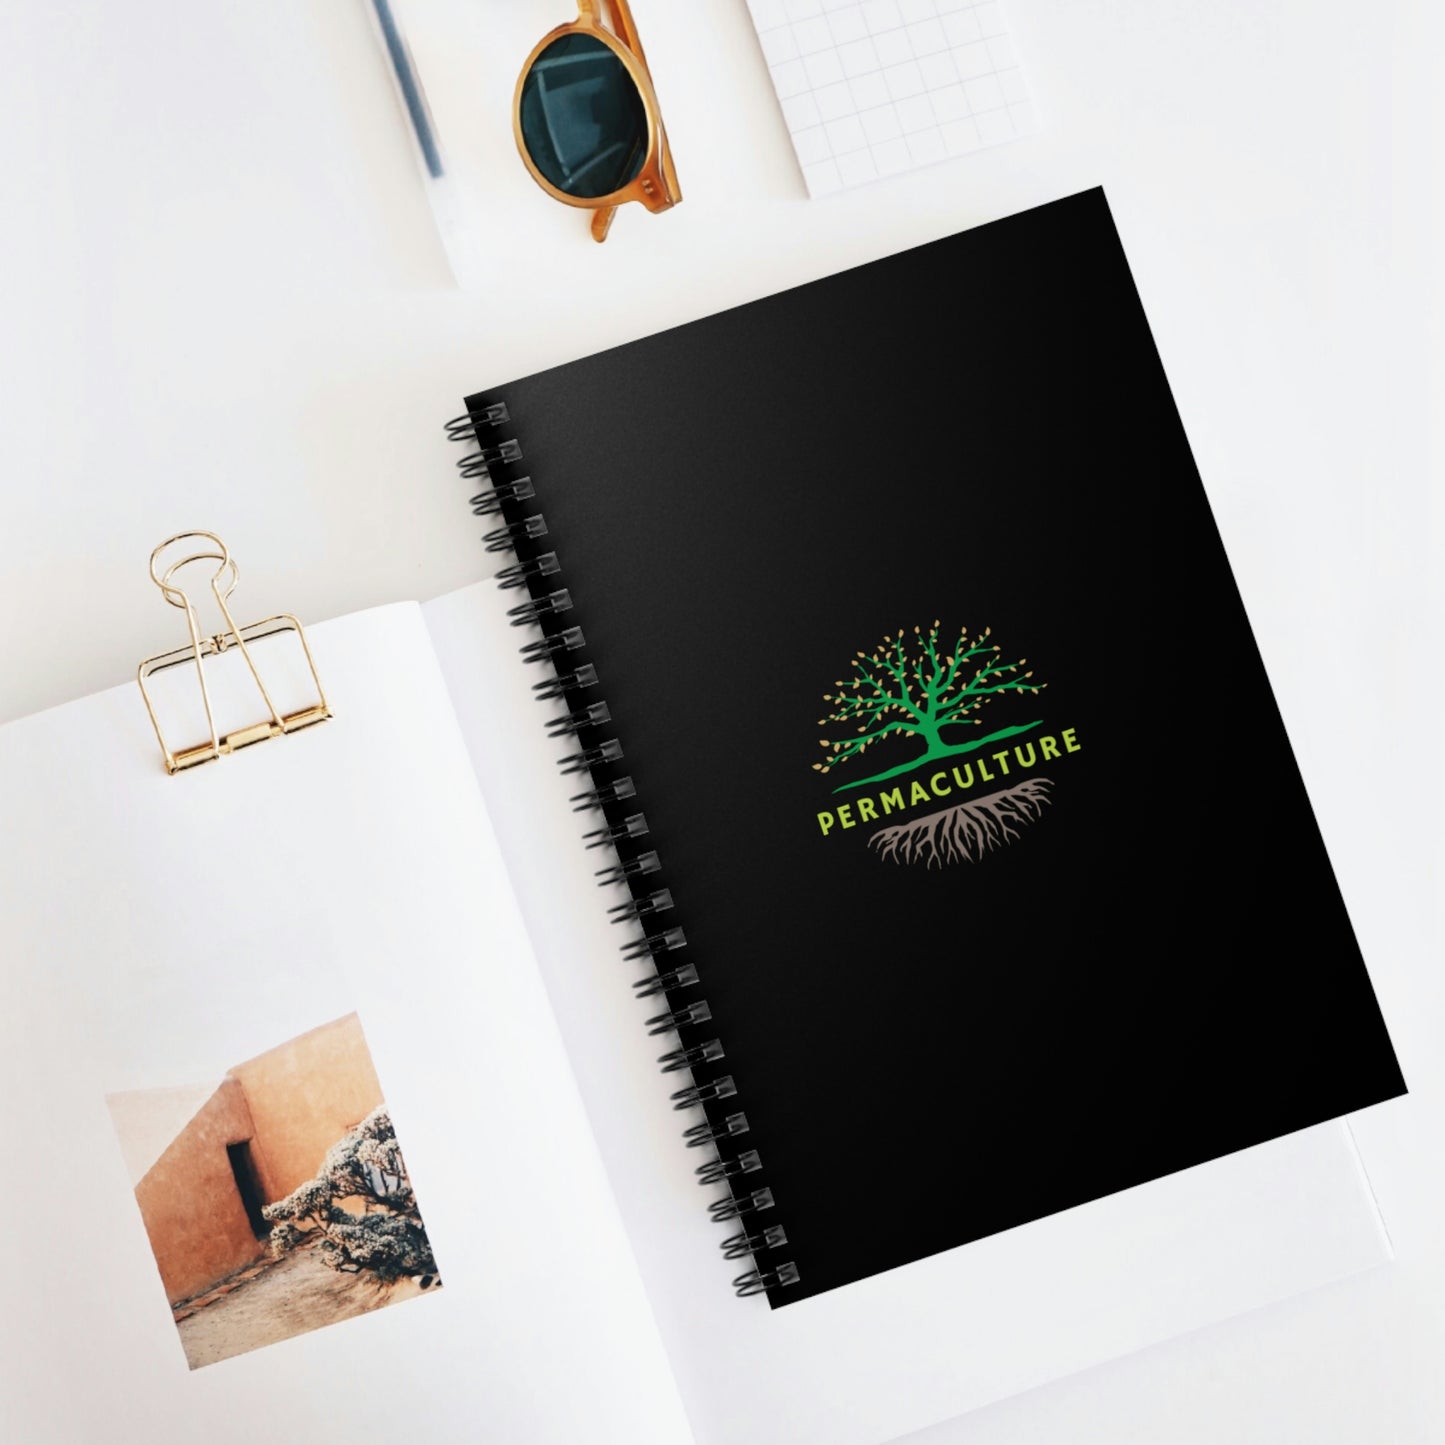 Permaculture - Spiral Notebook - Ruled Line - Black Cover